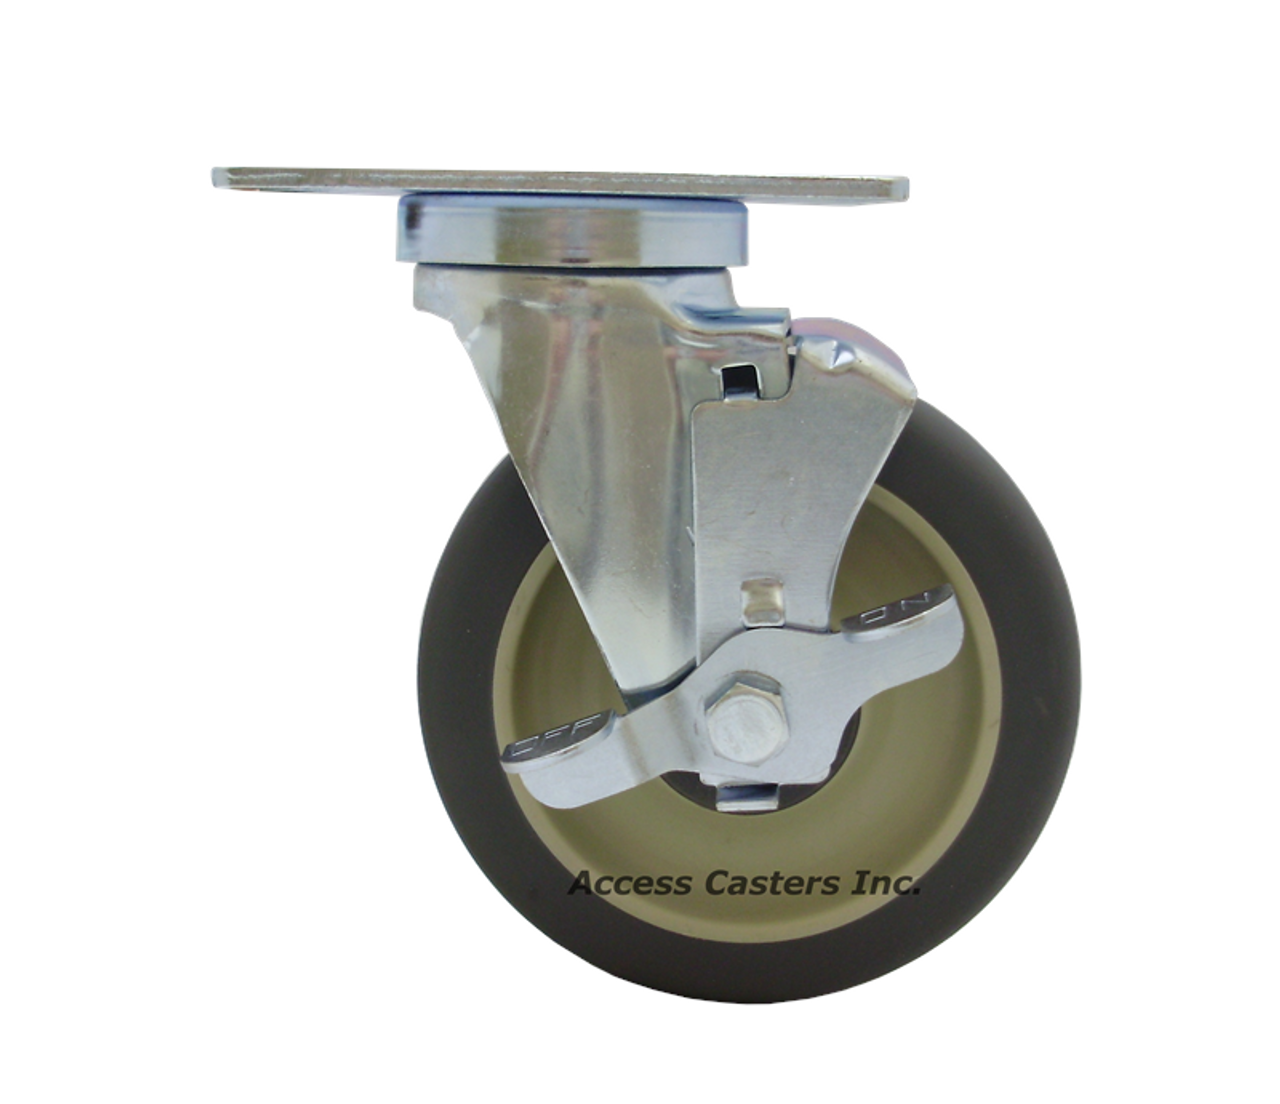 Replacement caster for Wittco holding cabinets & ovens